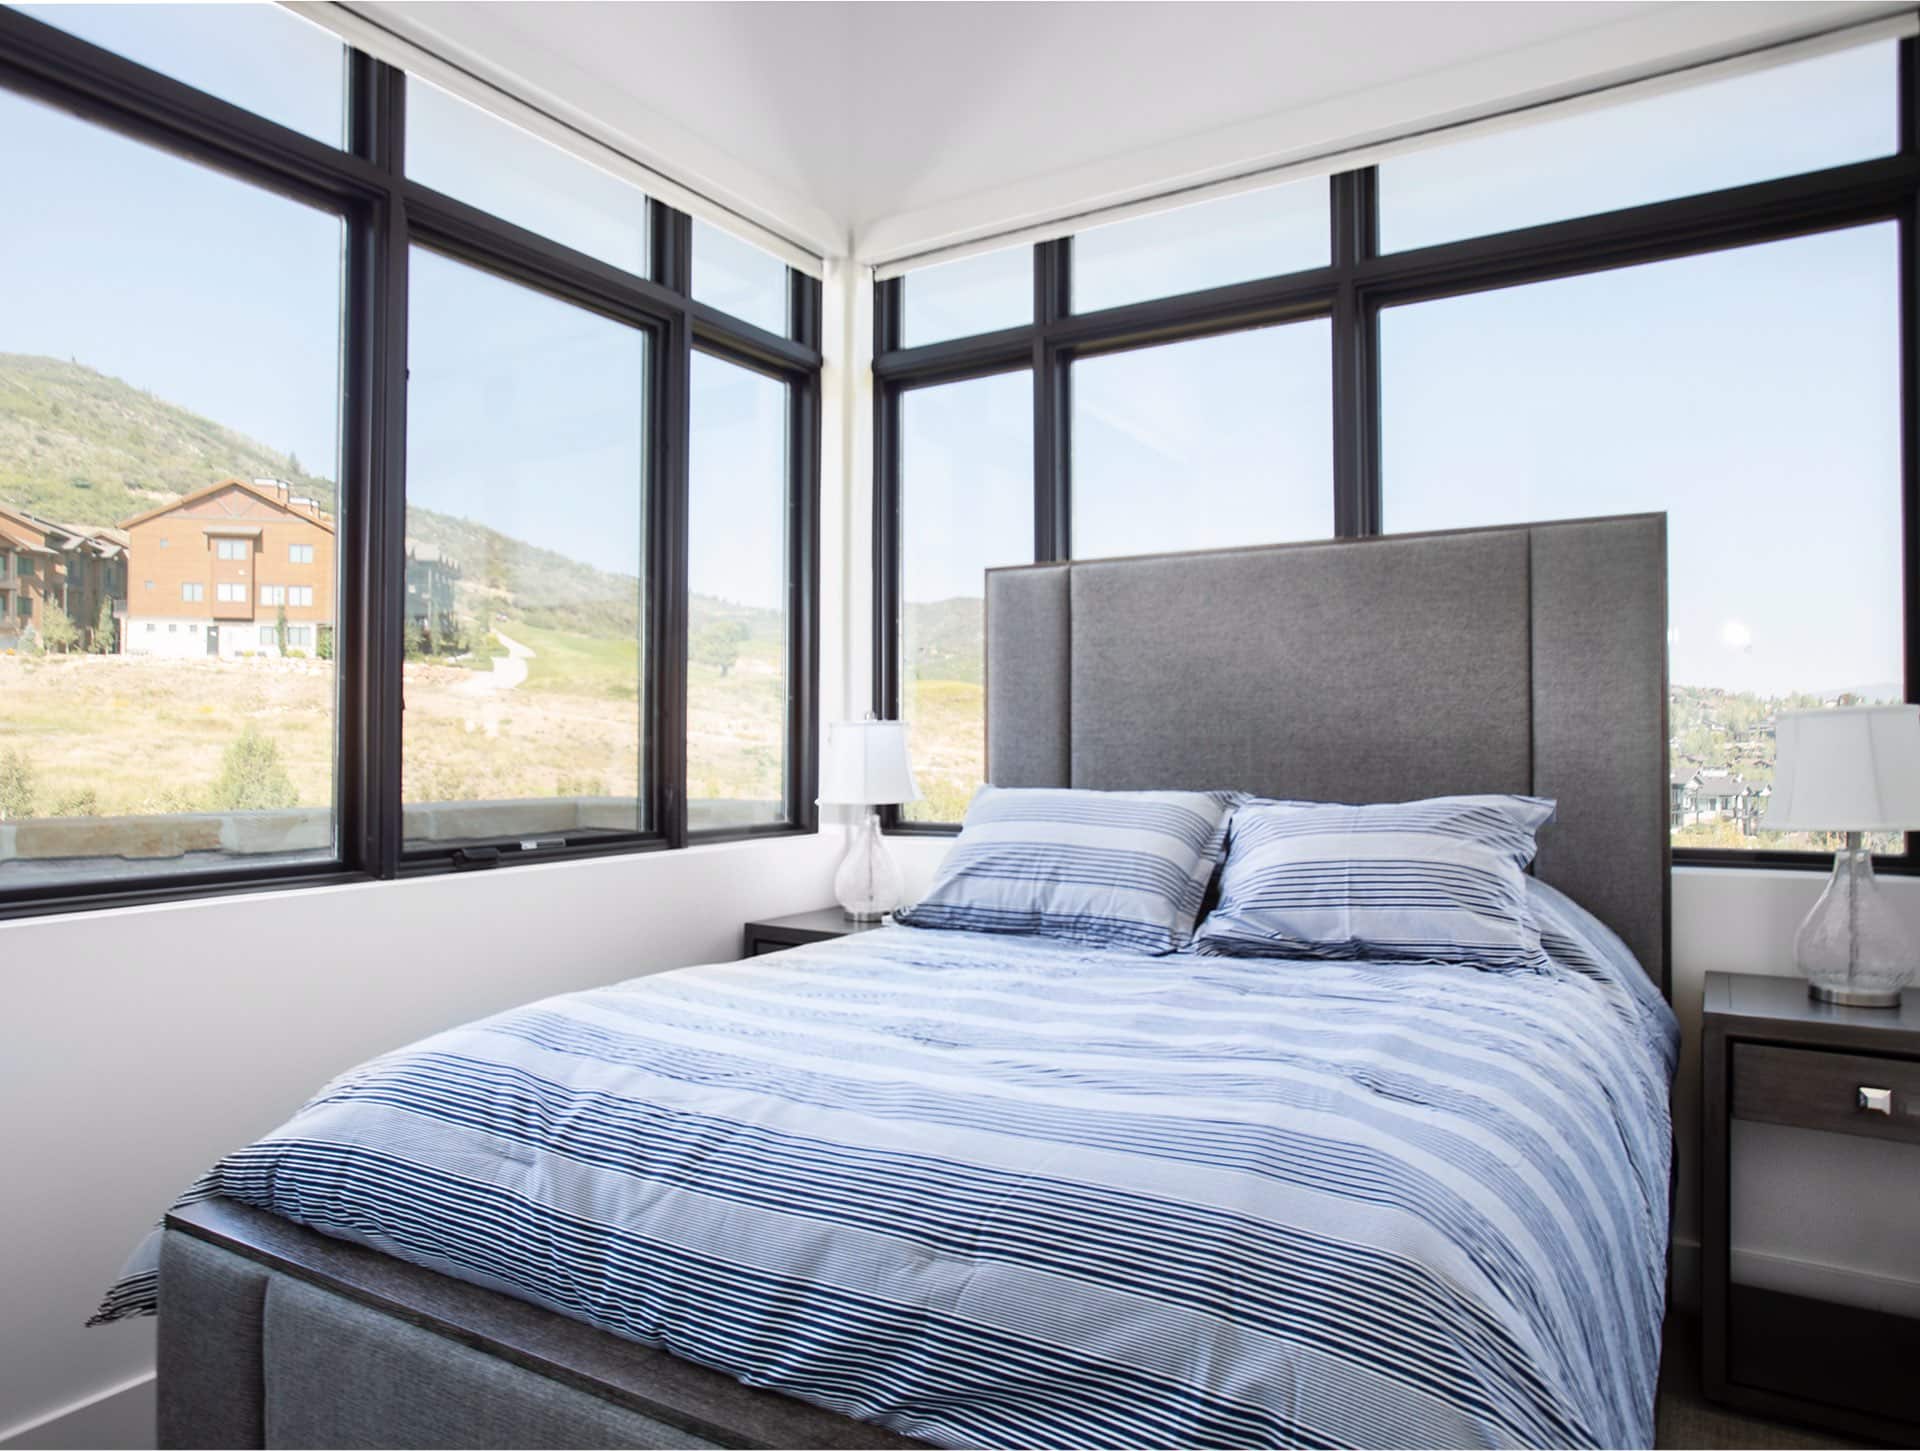 Viridian Townhomes bedroom - architectural design by Elliott Workgroup